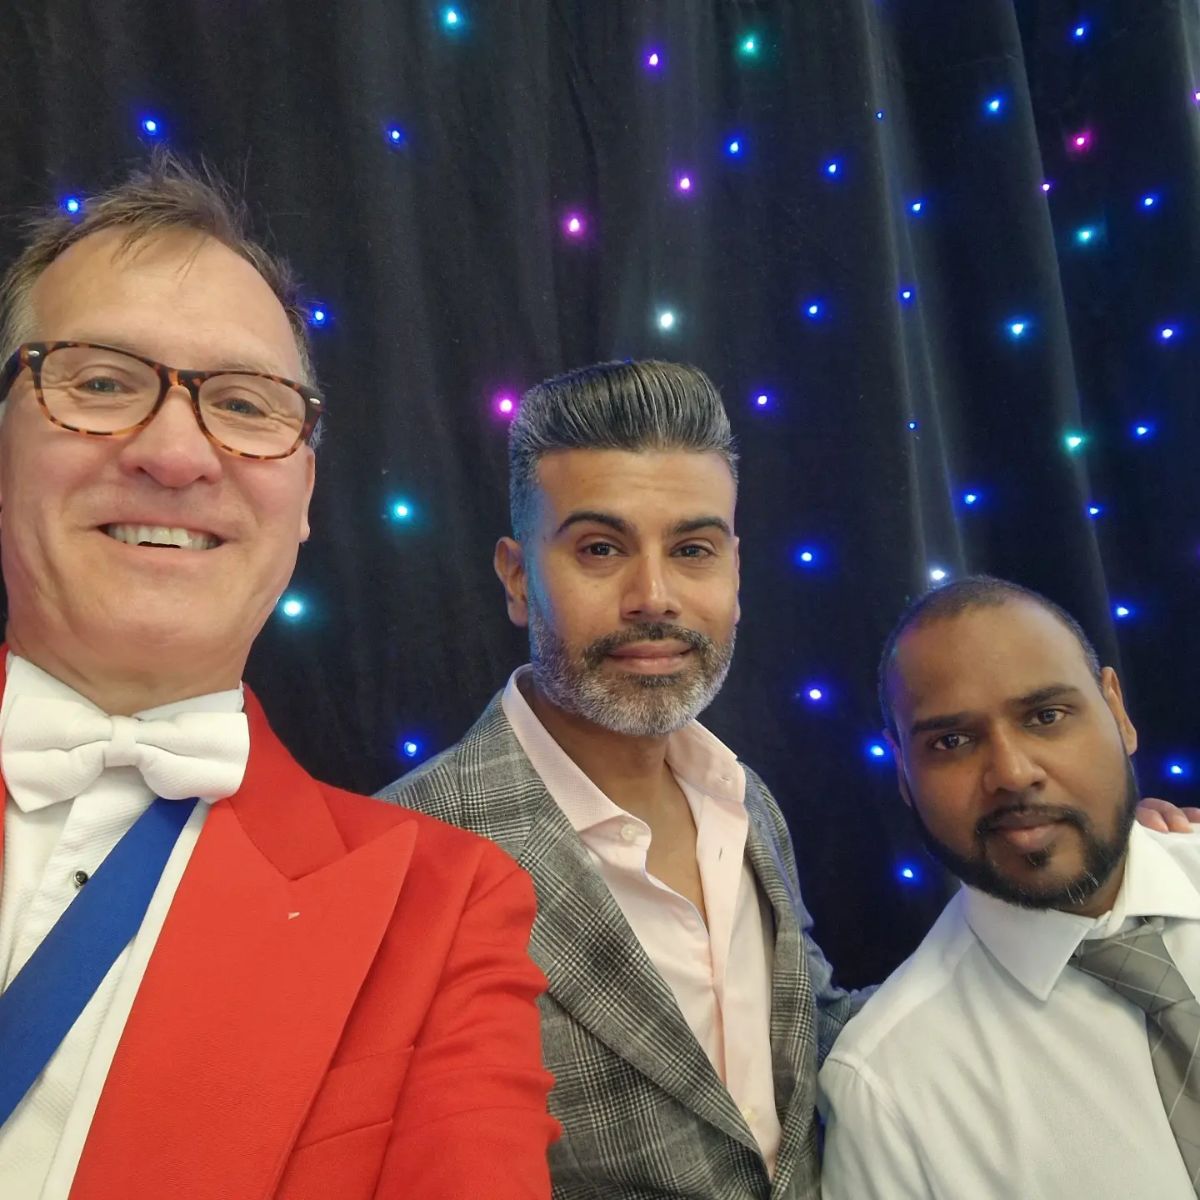 The Man in the Red Coat - Toastmaster James Hasler-Image-39